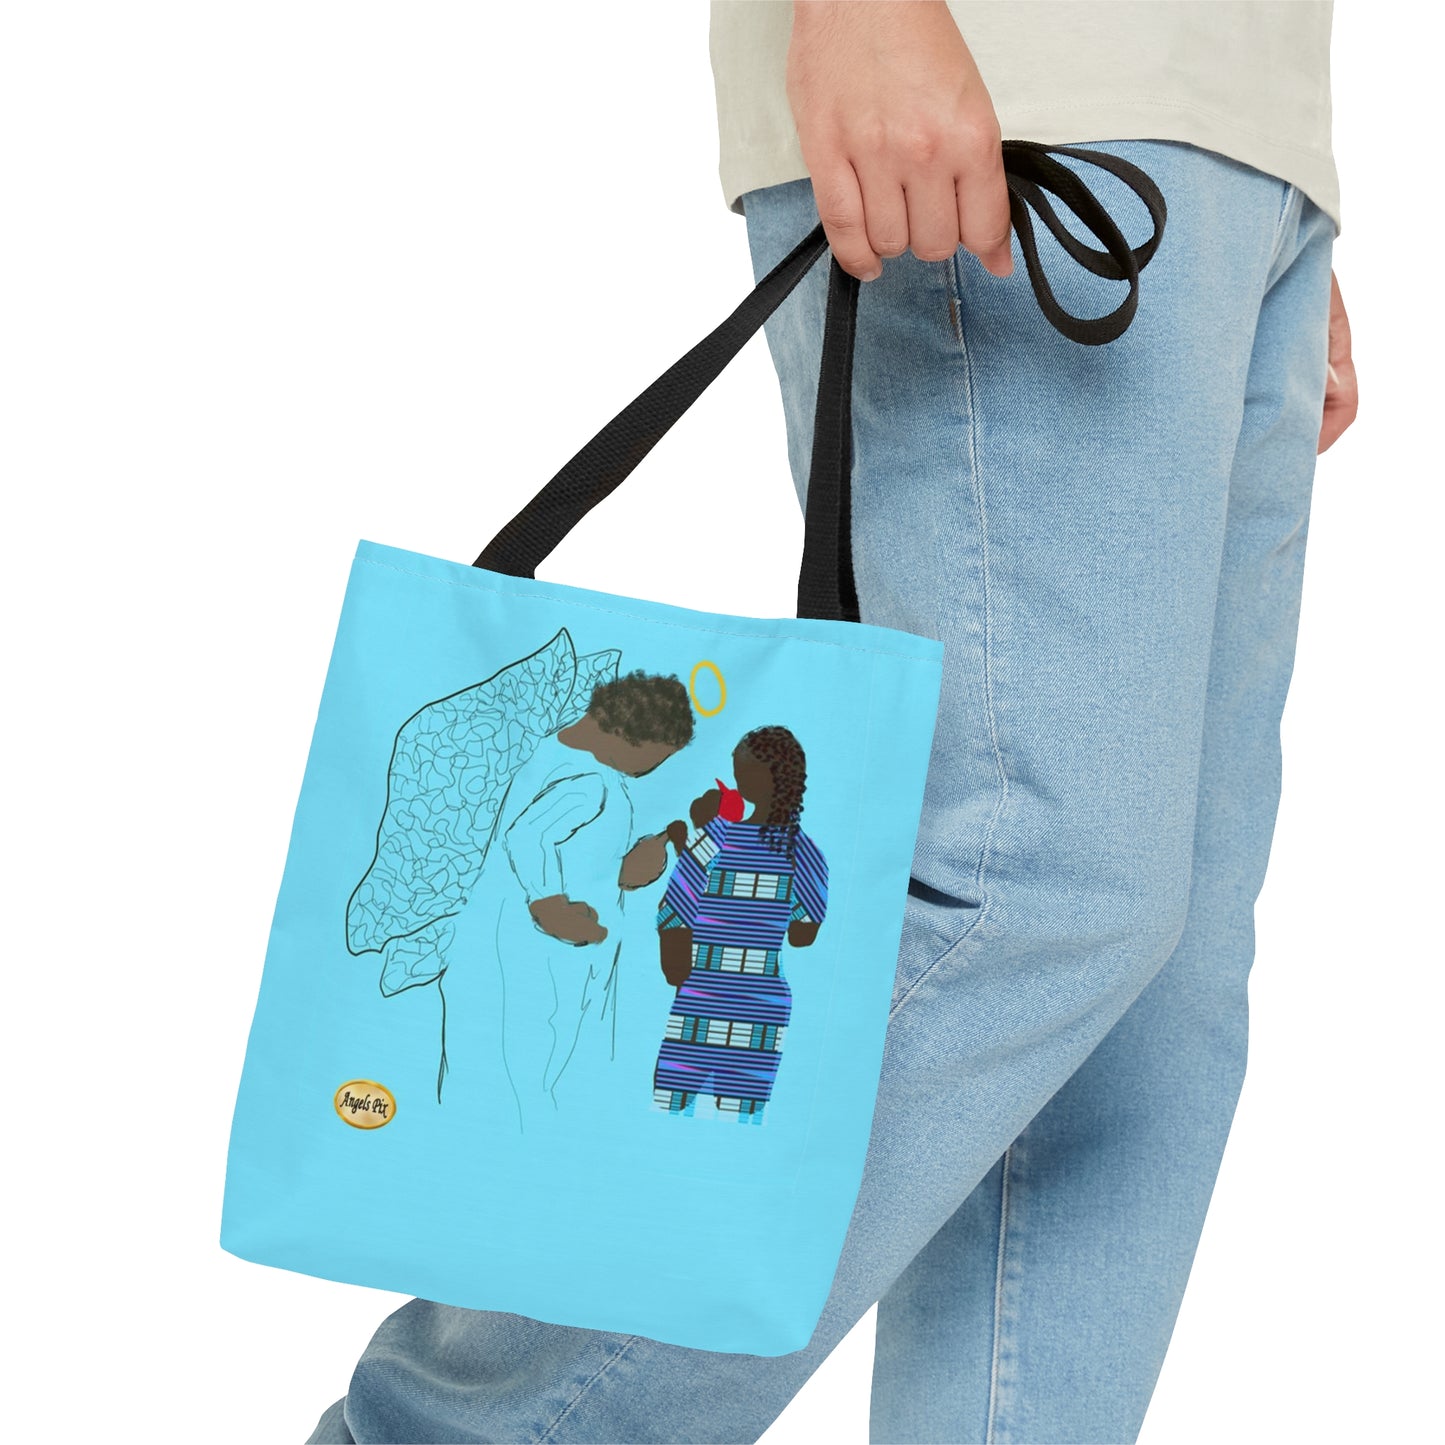 Gramma Angel Strapped Tote